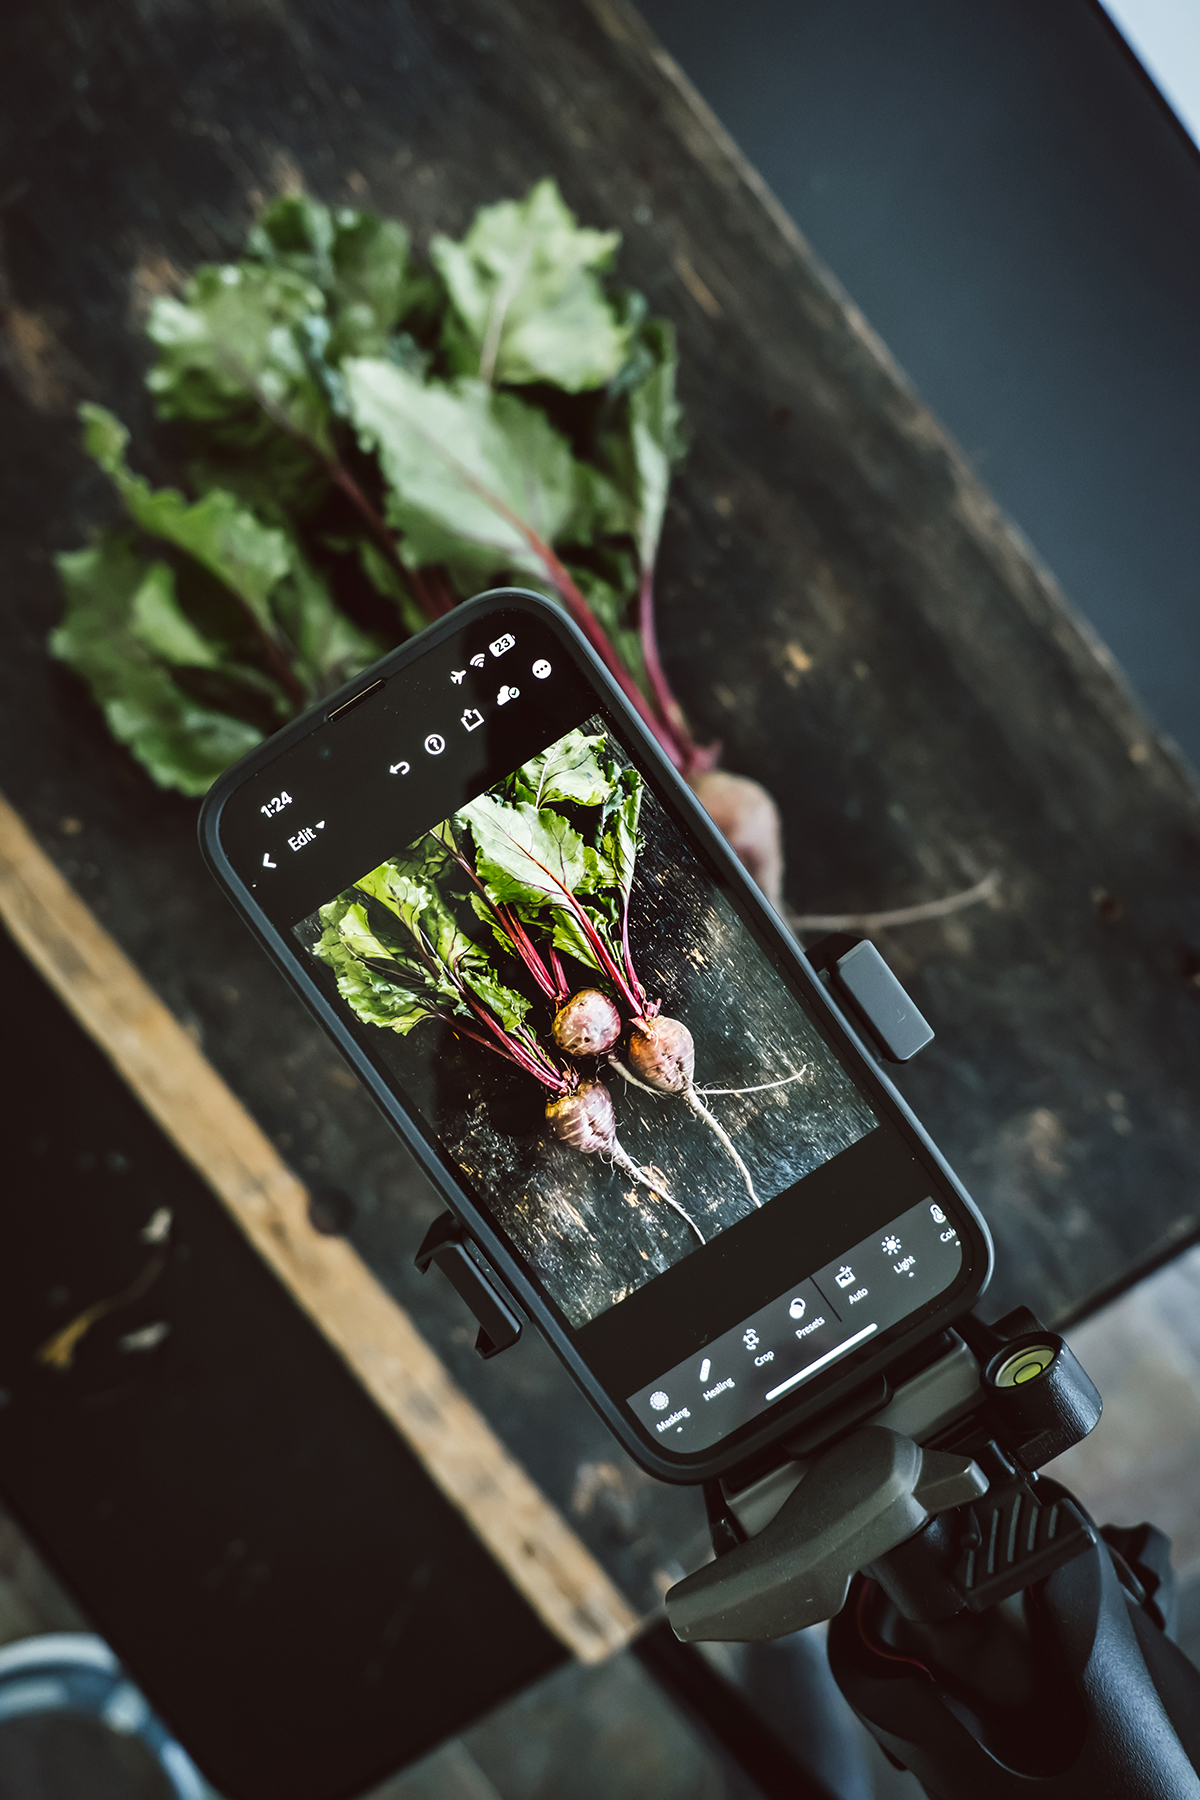 iphone tripod for food photography